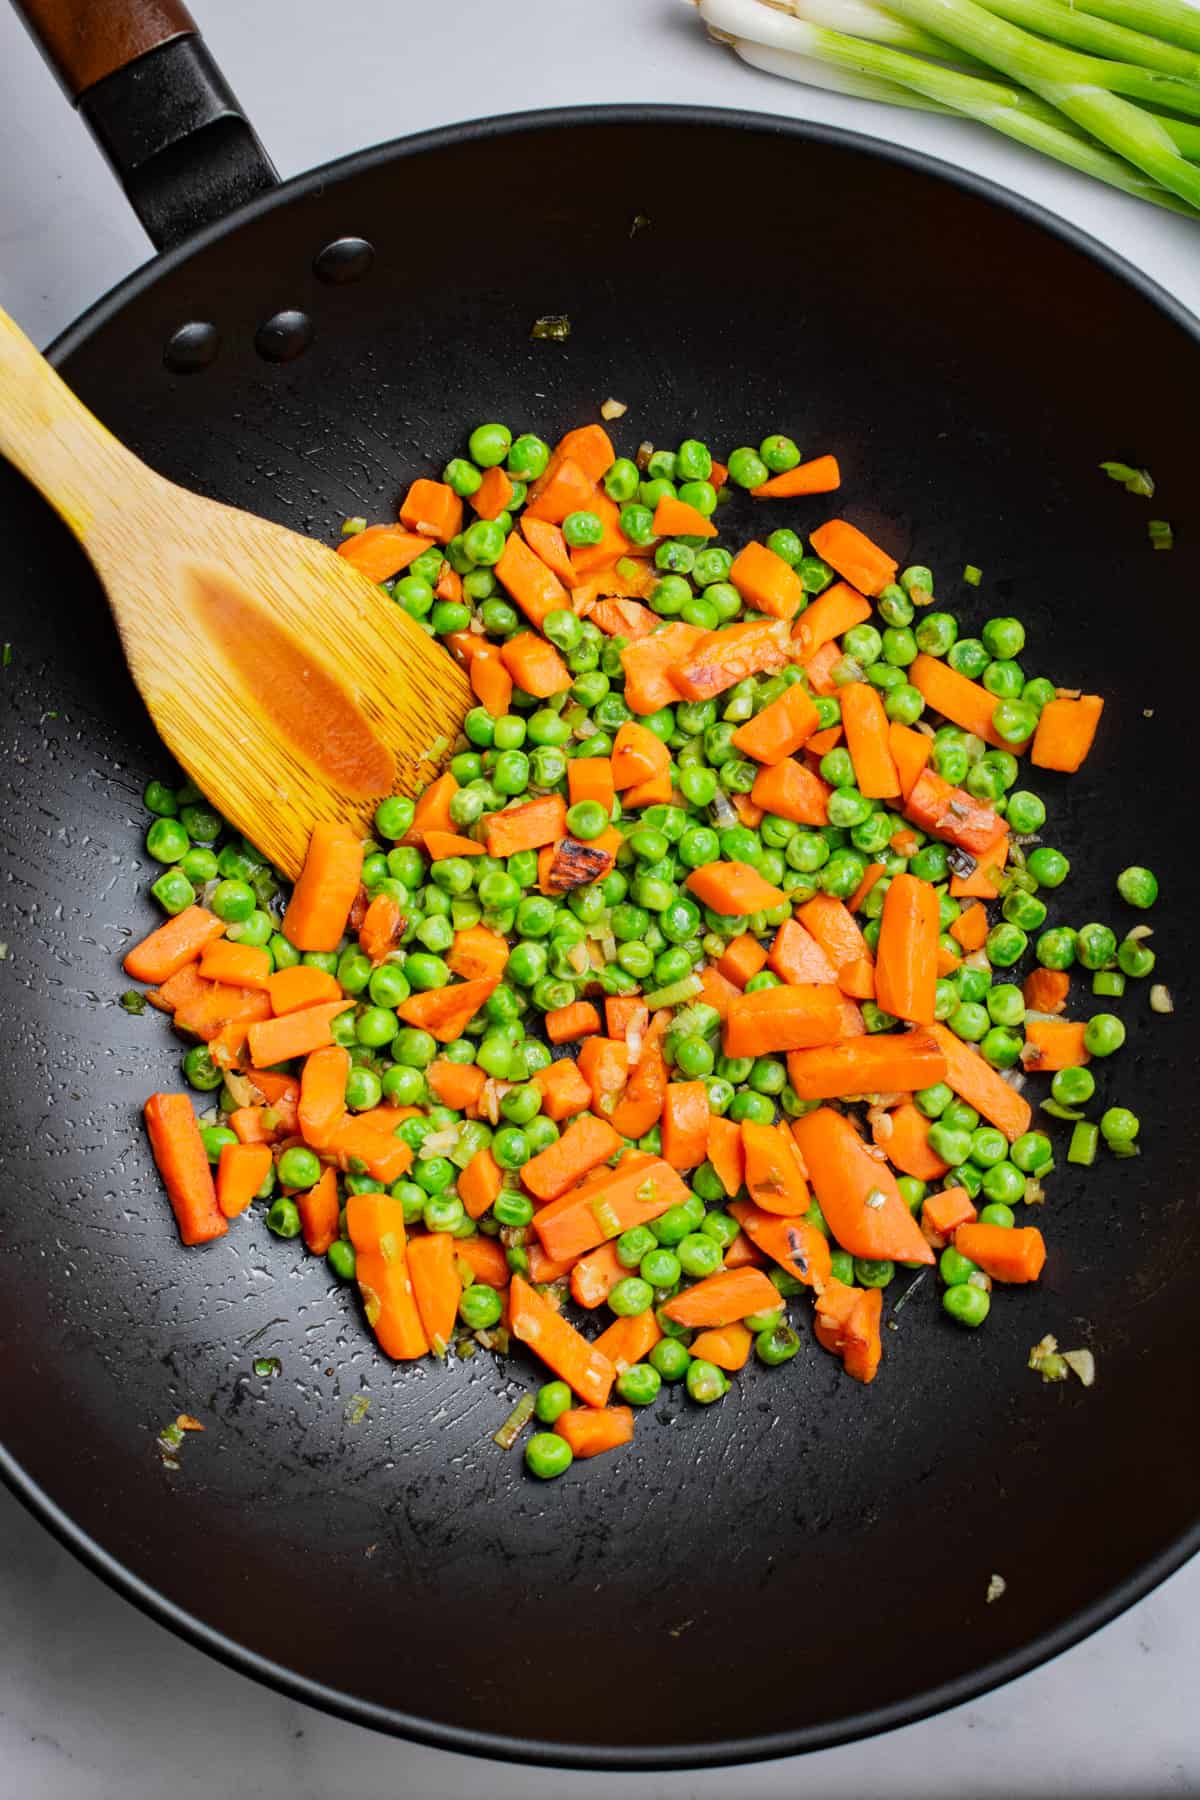 Peas and carrots stir fried in a wok.